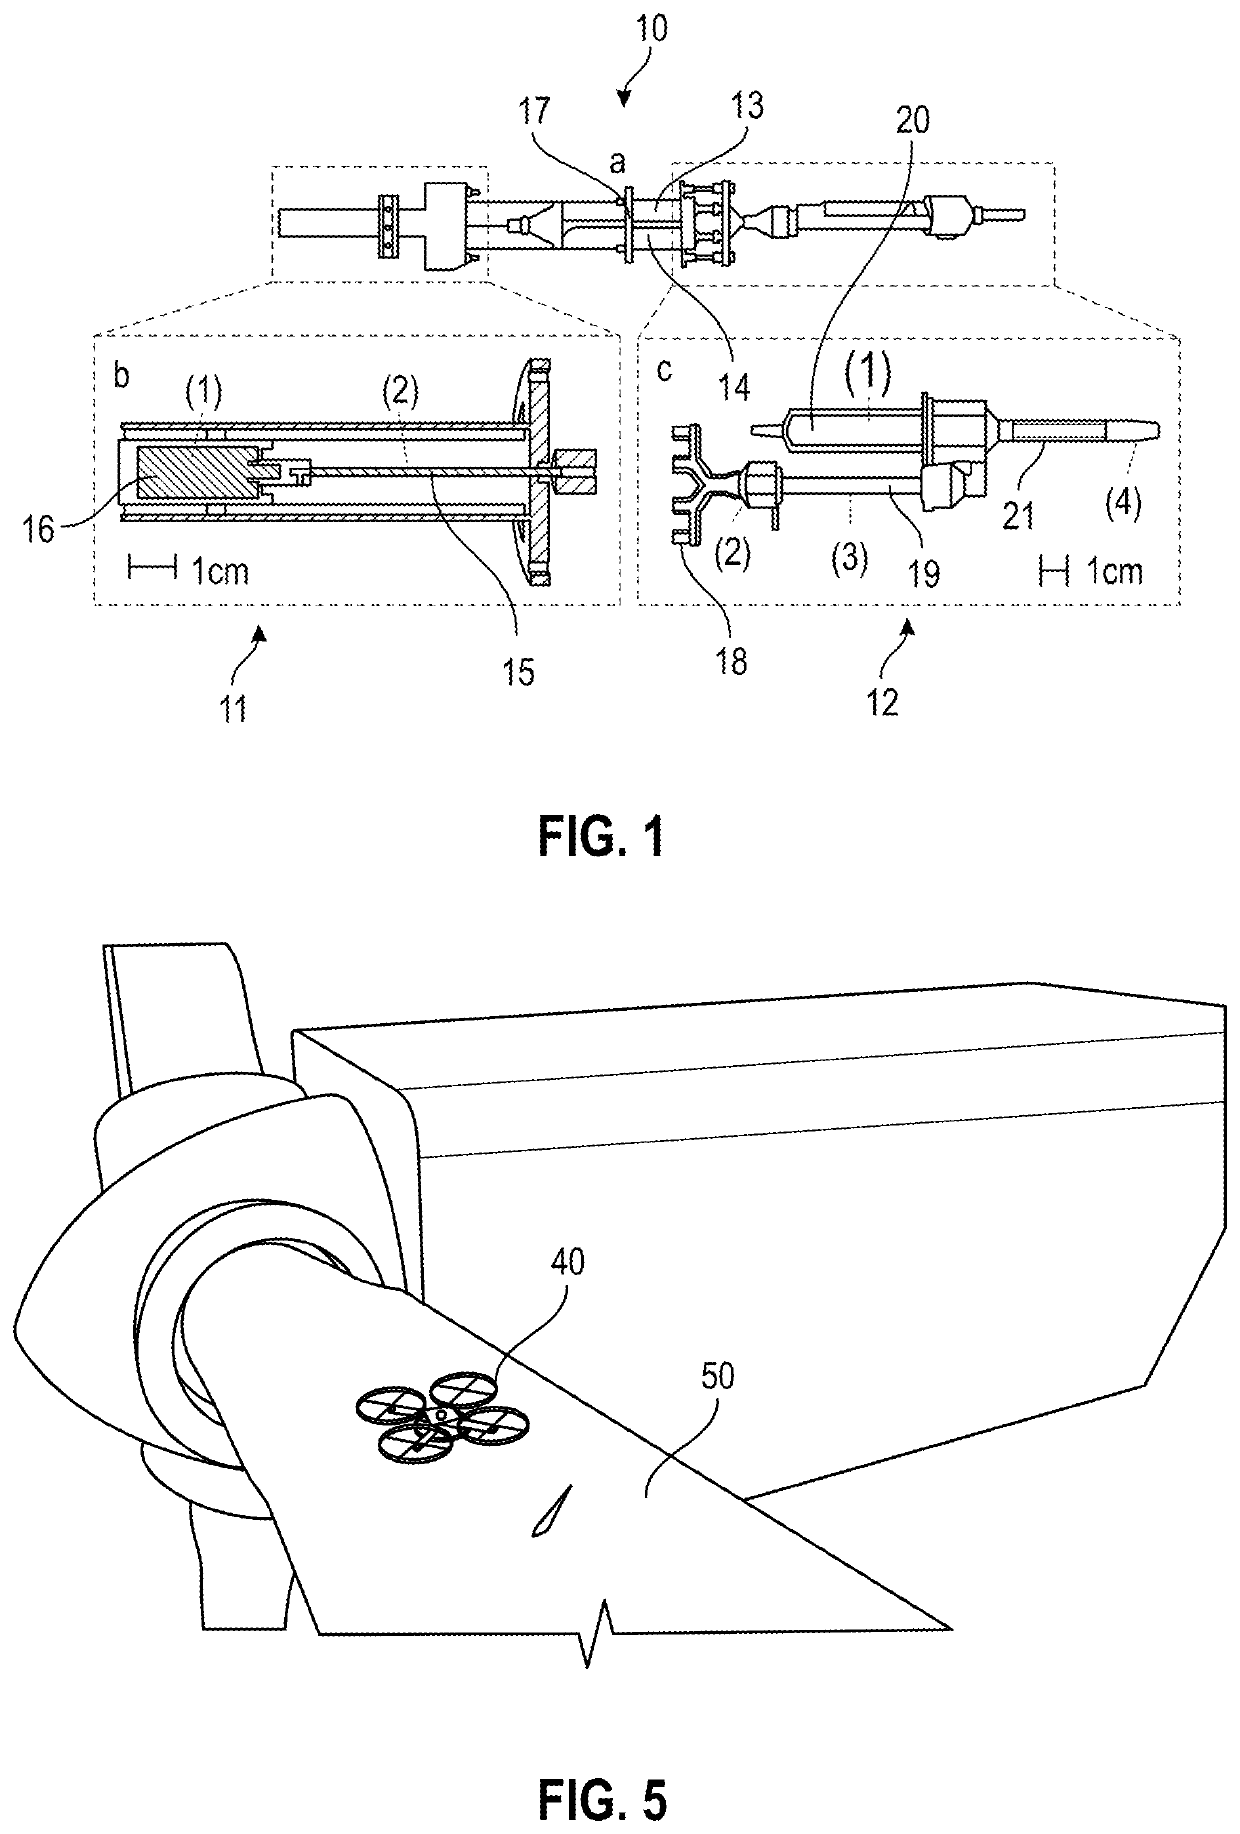 Method of using a device capable of controlled flight